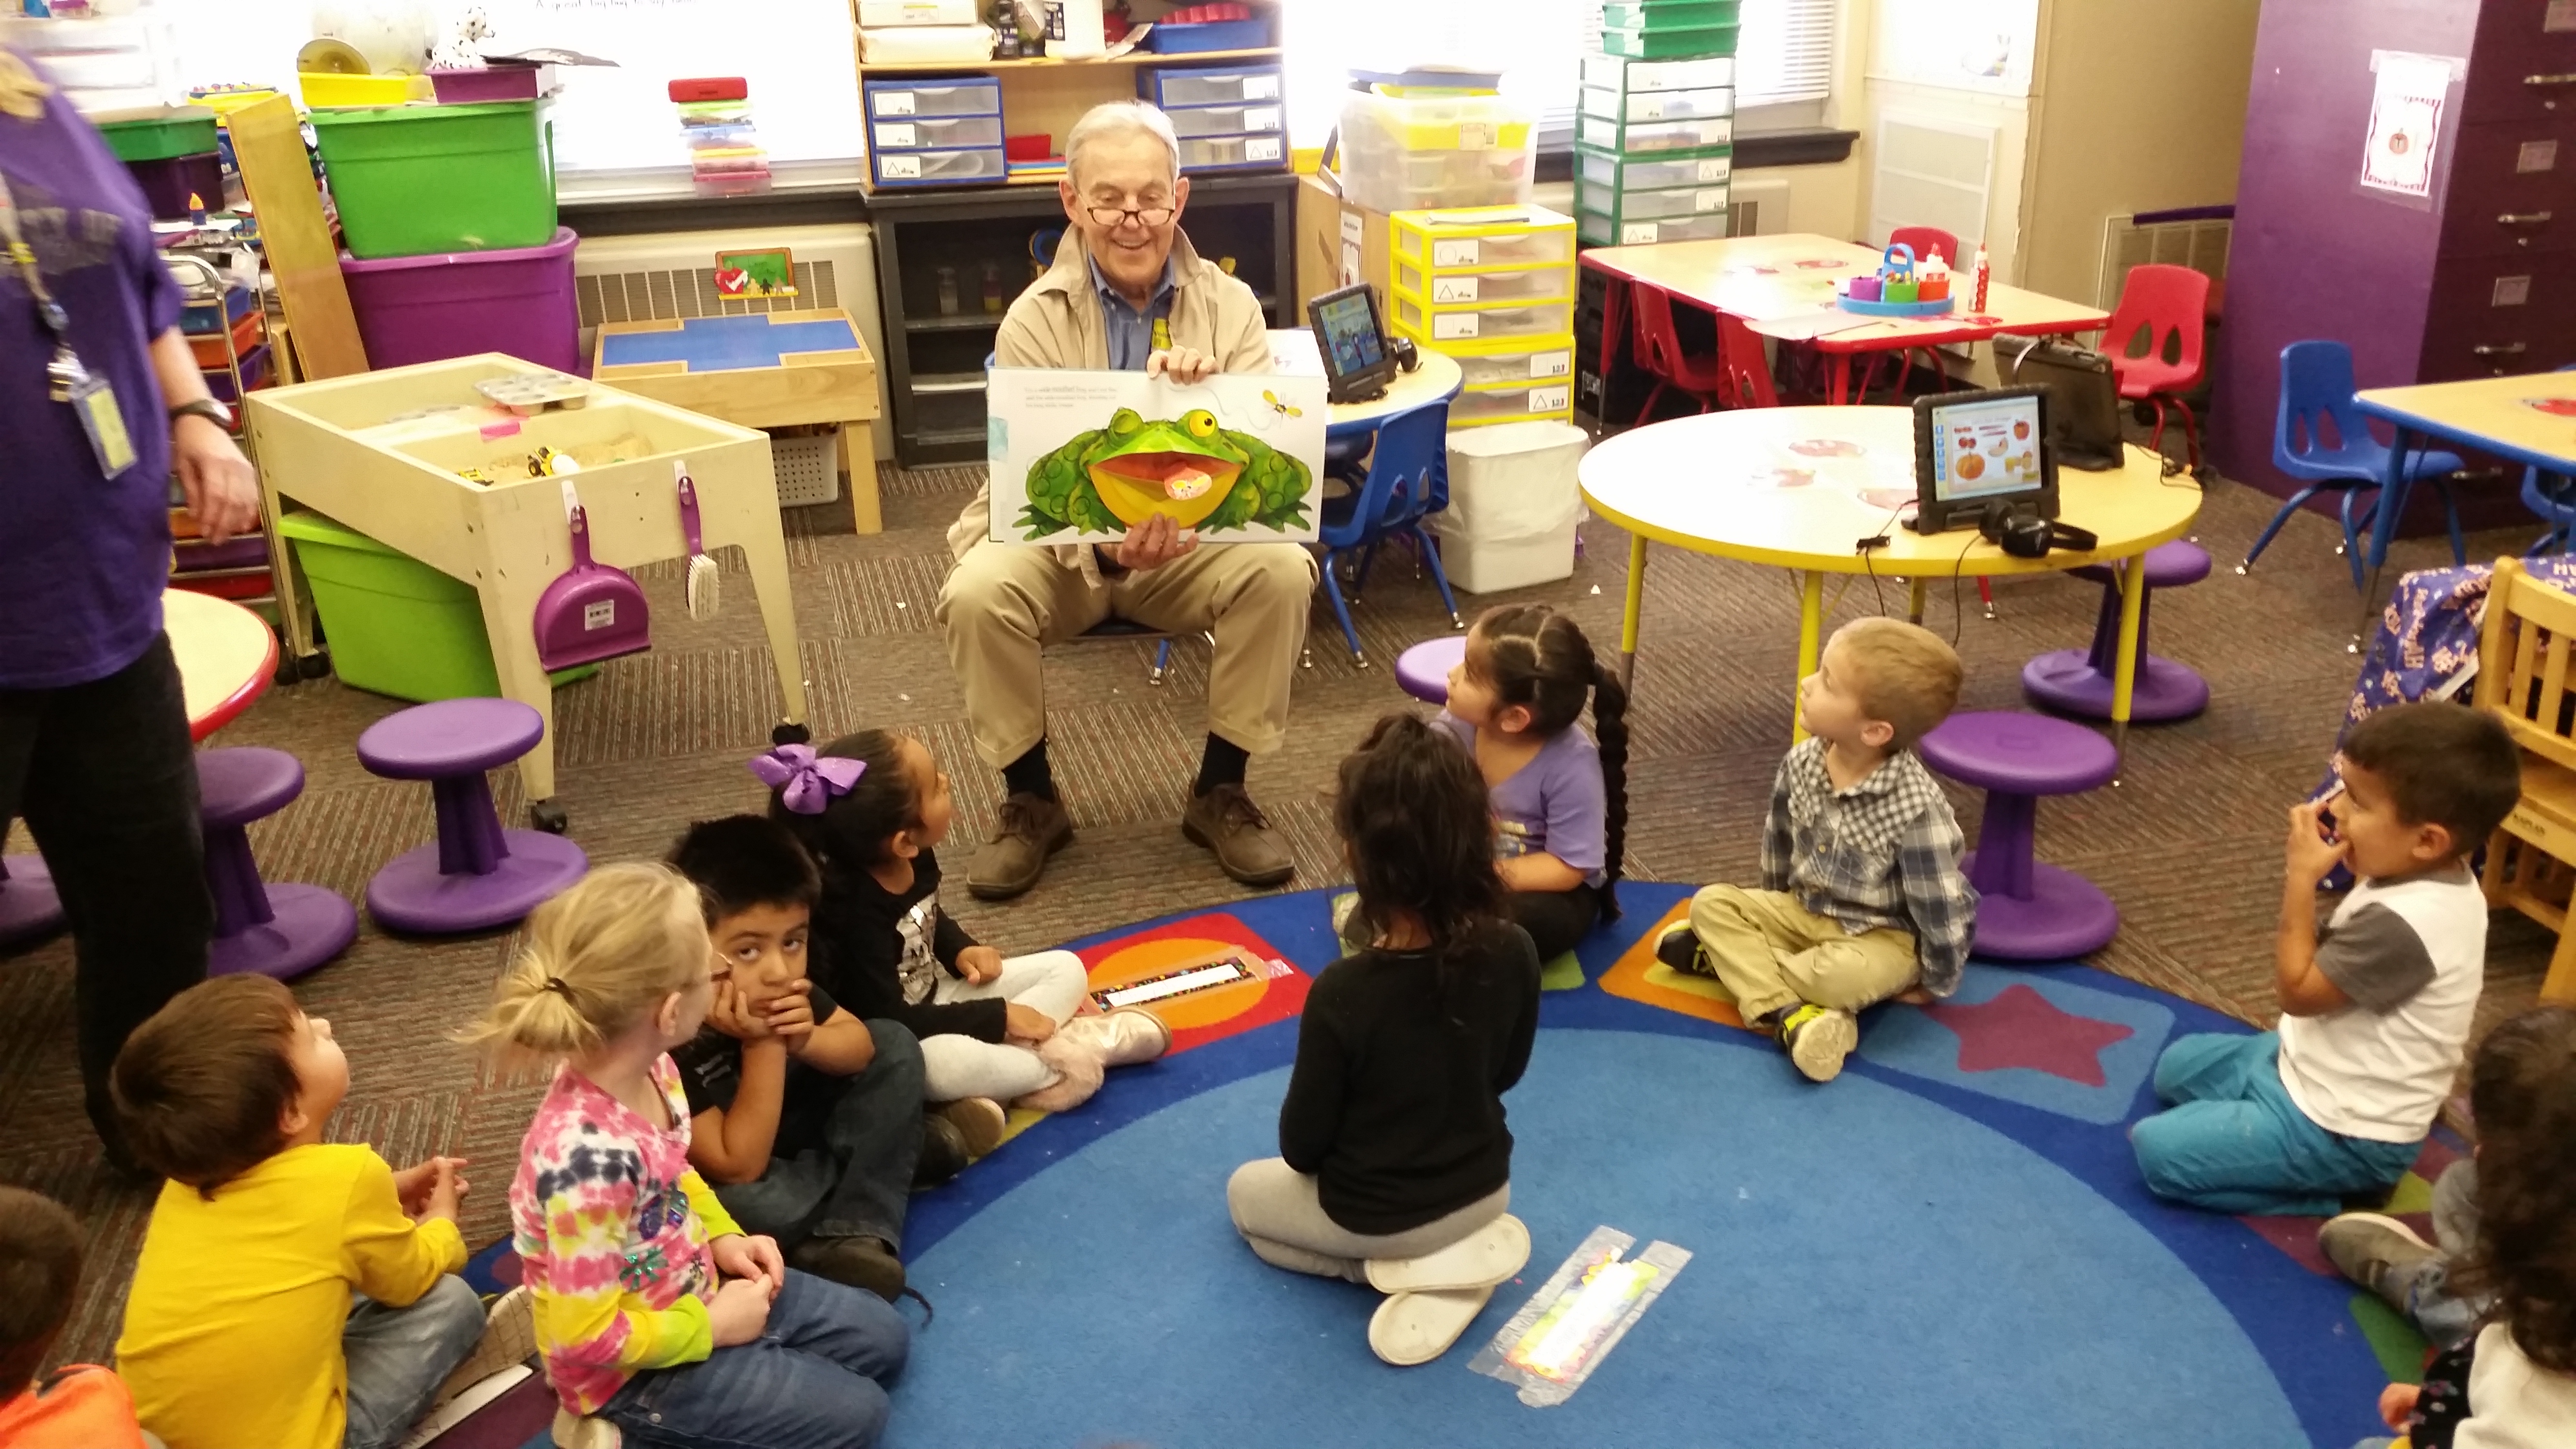 Our friend Bob reading to Carver Kids